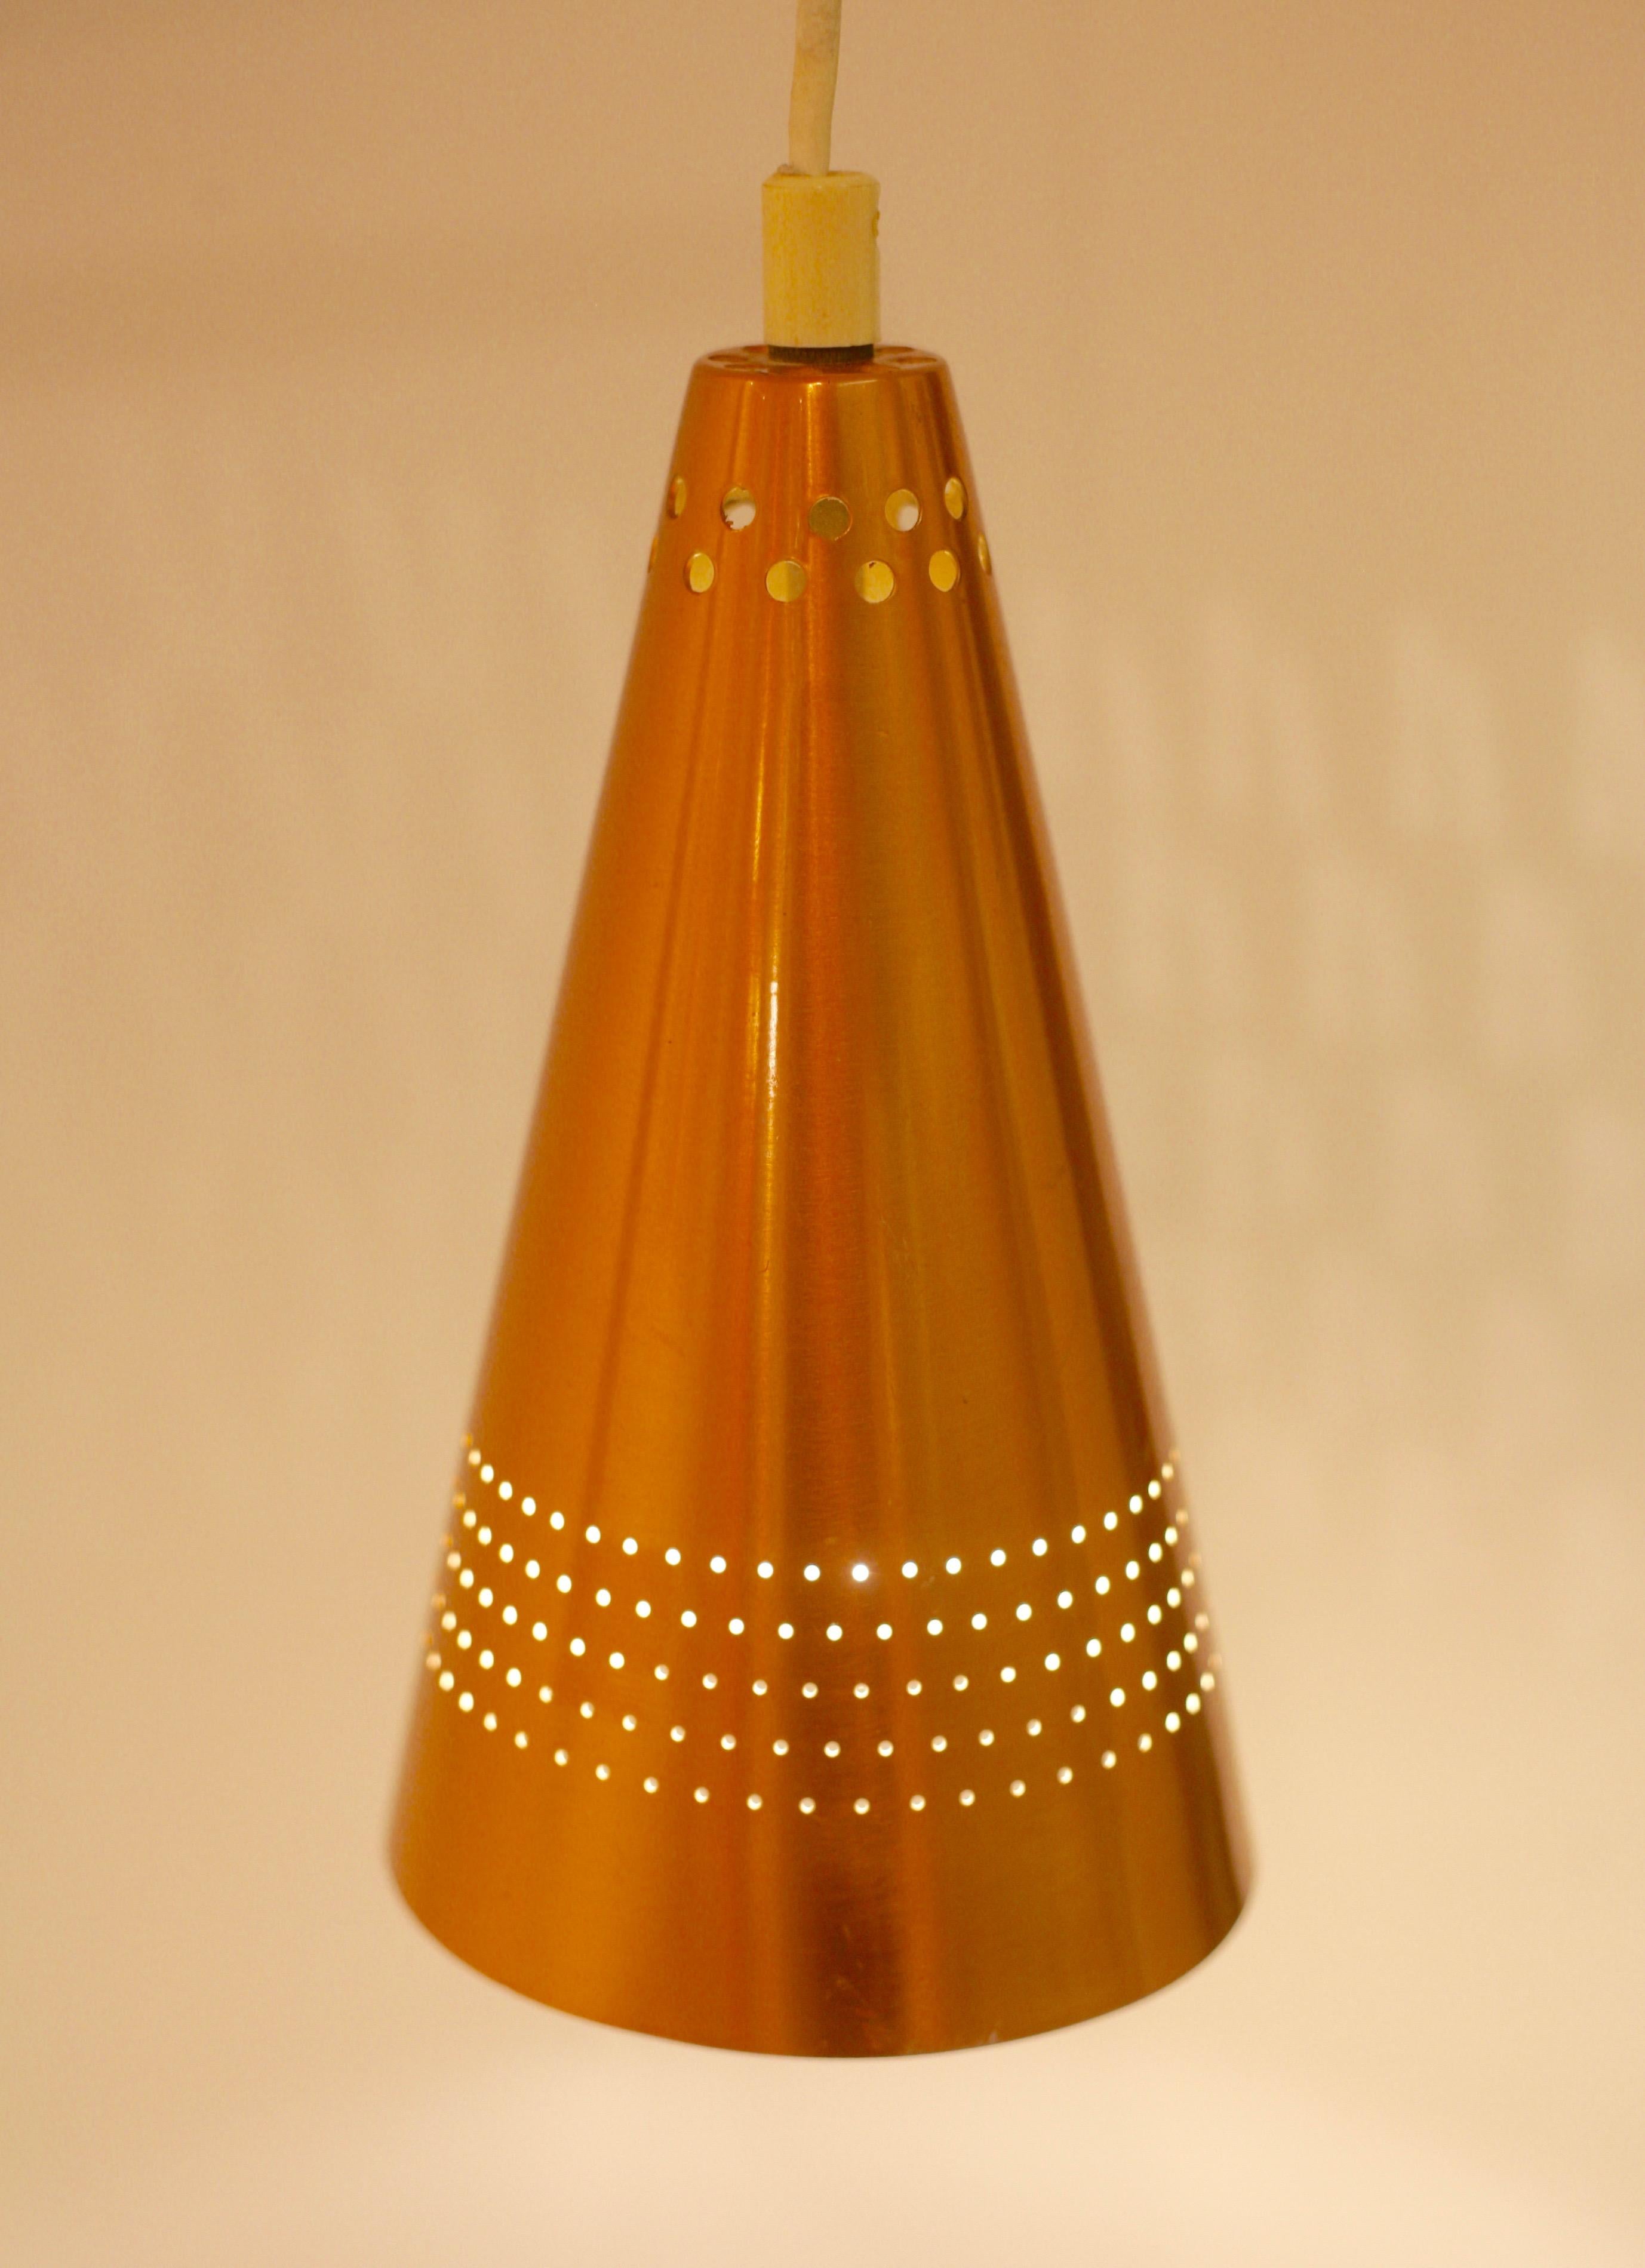 Extremely rare, early wall lamp designed by Hans-Agne Jakobsson and produced by his own company while still in Åhus, before the move to Markaryd, 1956. Model S-1718. Copper and teak. Measurements for total lamp. Lamp cone measures 21x12 cm.